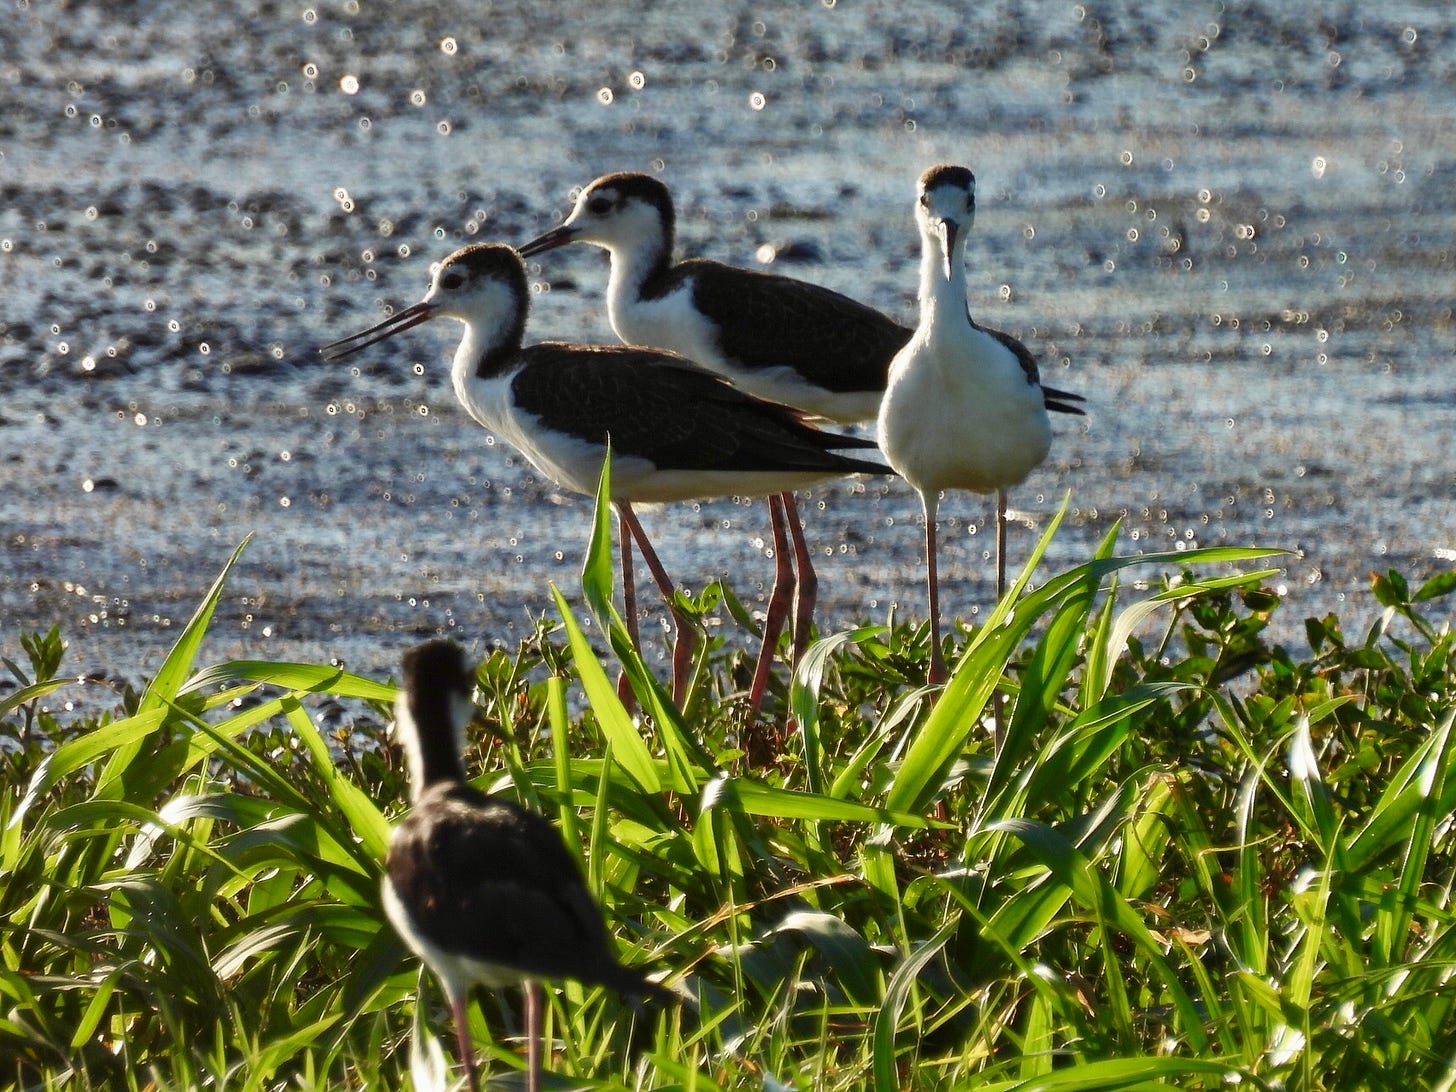 Four tall delicate-looking shorebirds stand at the grassy edge of a lustrous mud flat. They have white under parts and black stretching across the wings, back, back of the neck, and crown. Their bills are dainty, black, and medium-long. Their legs are lanky and pink.